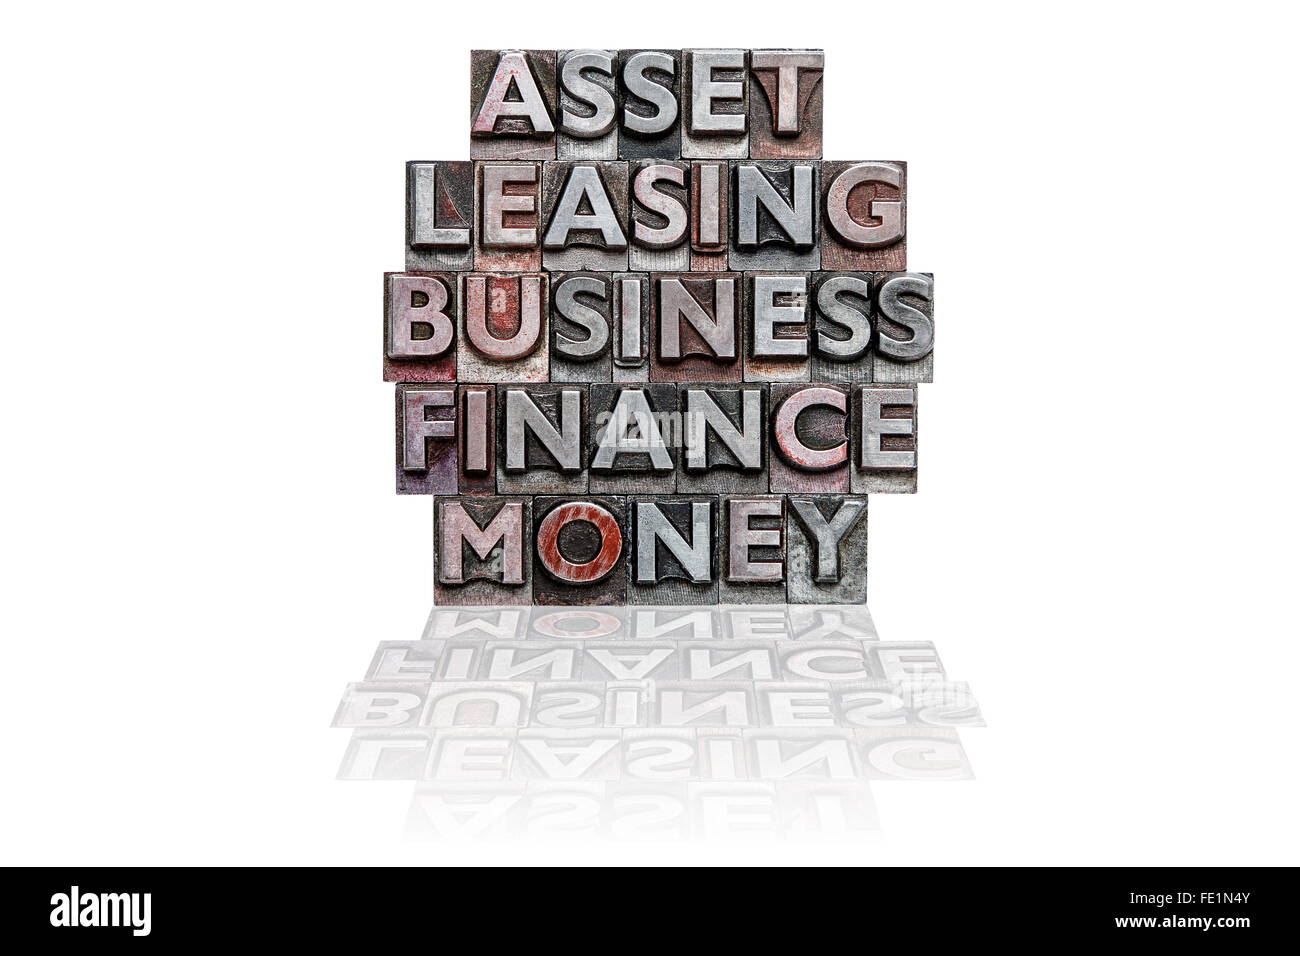 The words ASSET, LEASING, BUSINESS, FINANCE and MONEY in a stack made from old metal letterpress on a white background. Stock Photo